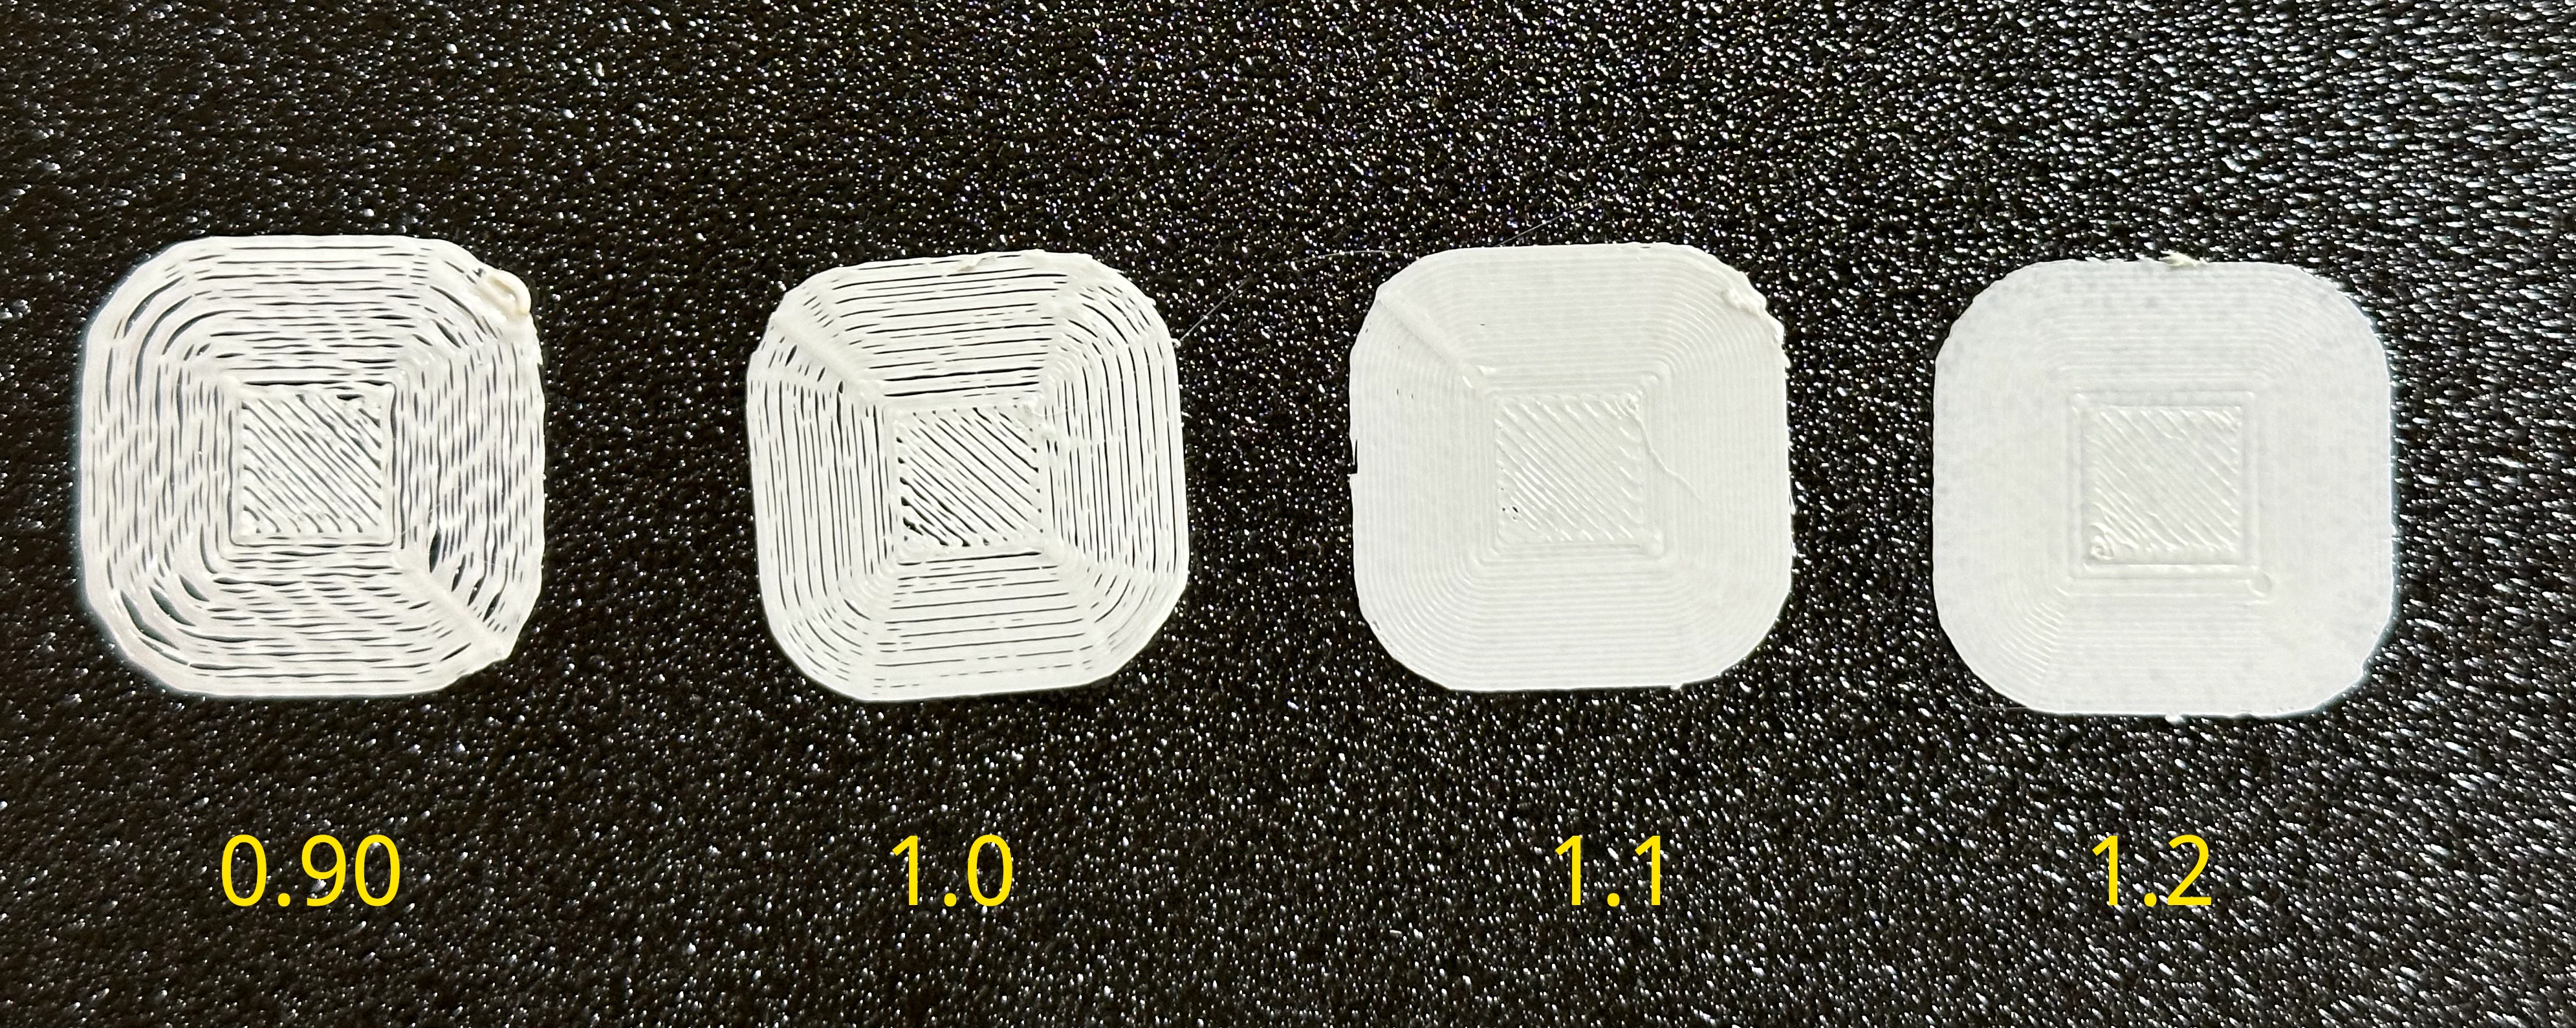 Four sample prints showing various z-axis settings